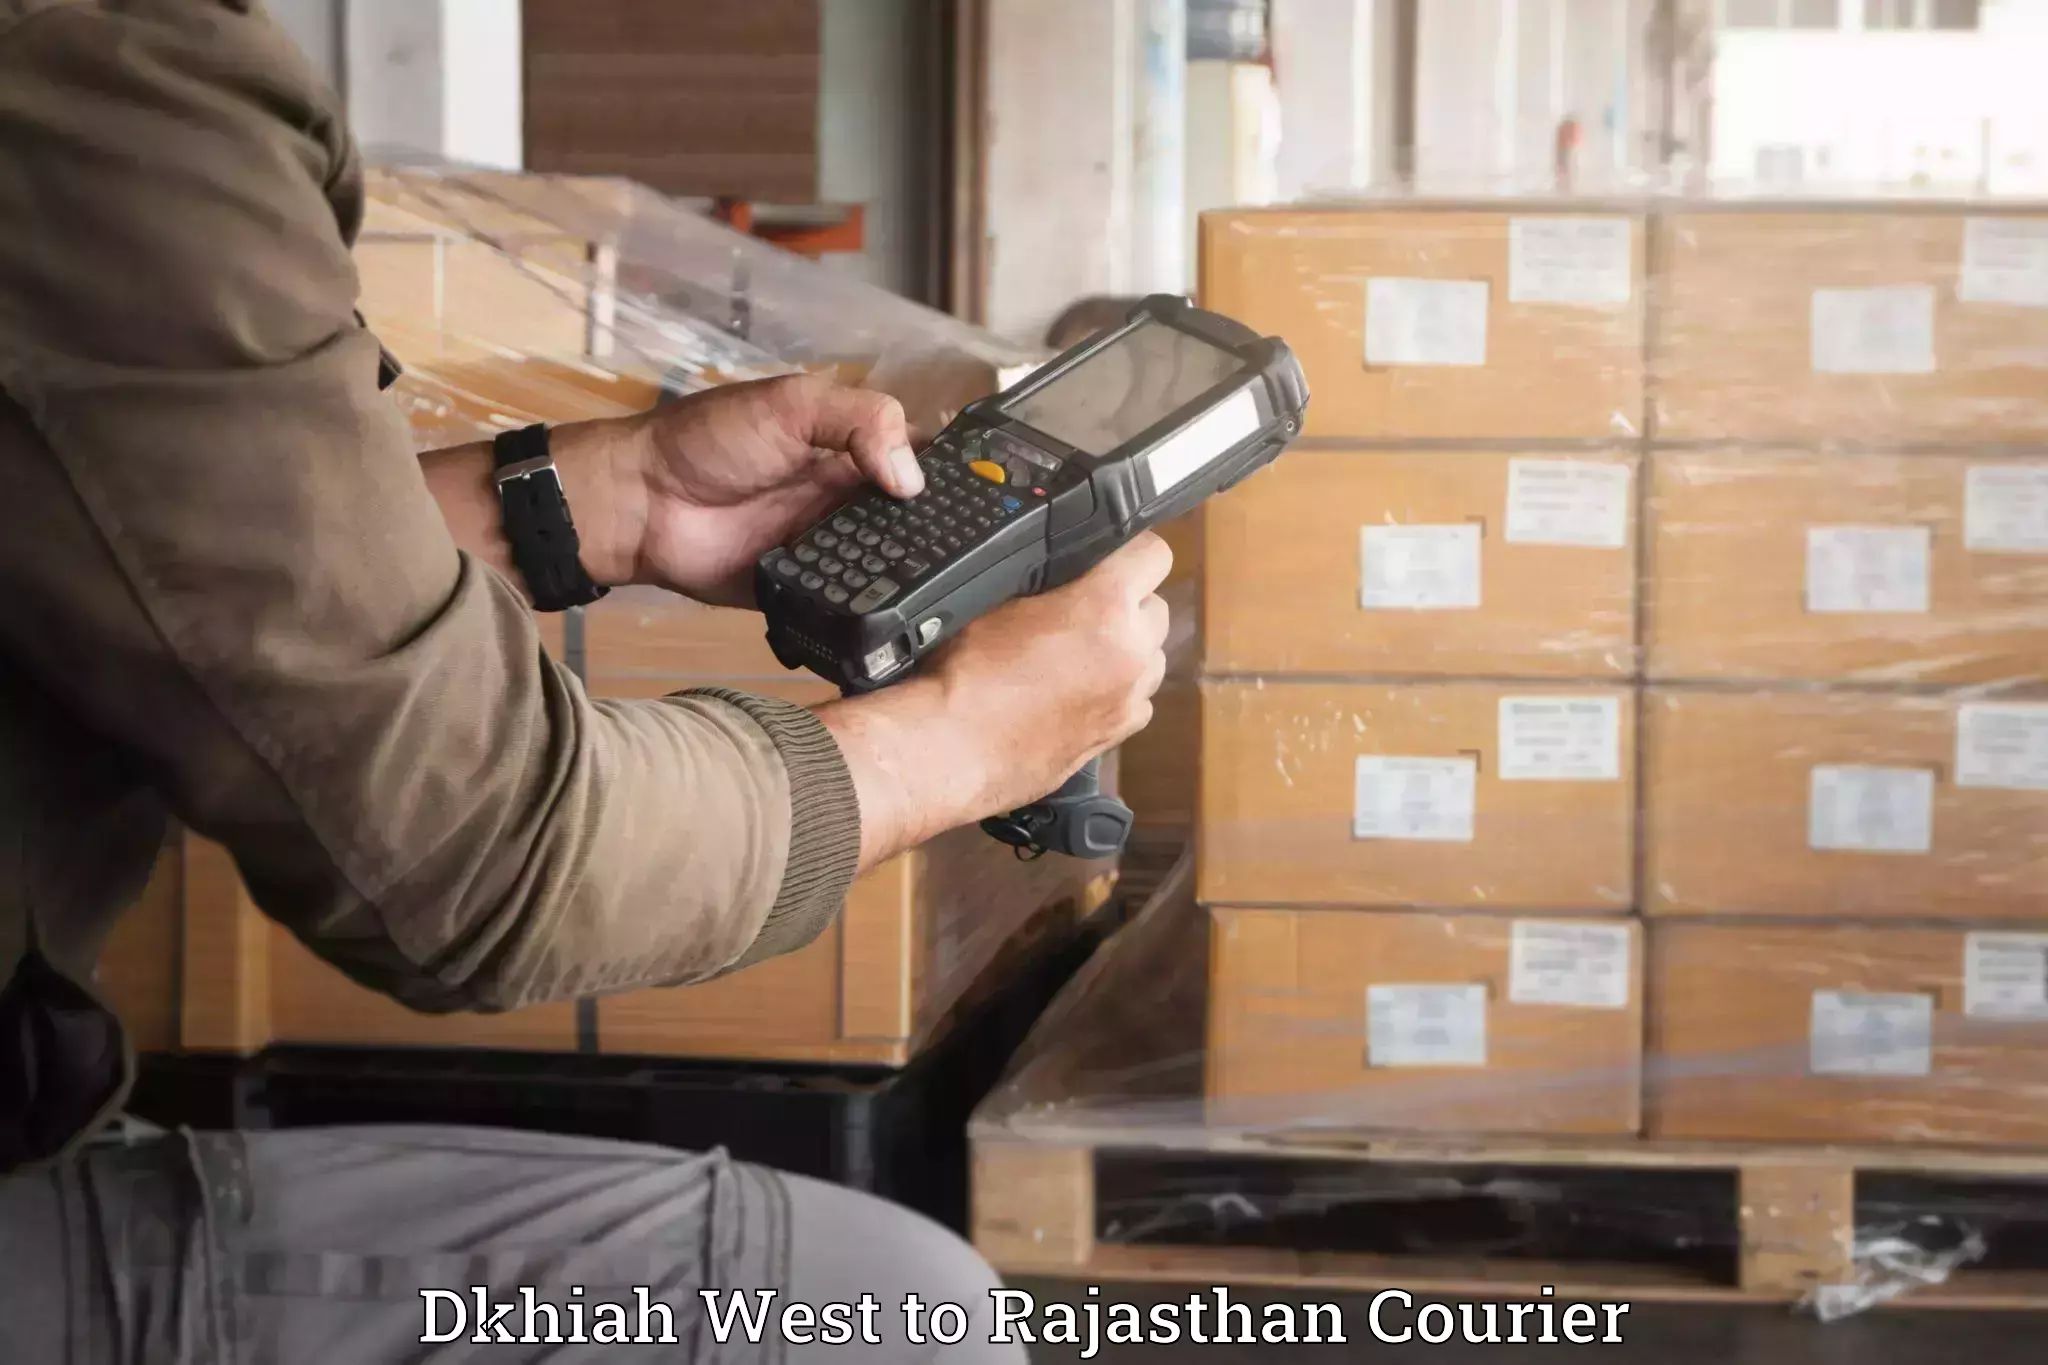 Personal effects shipping Dkhiah West to Rajasthan